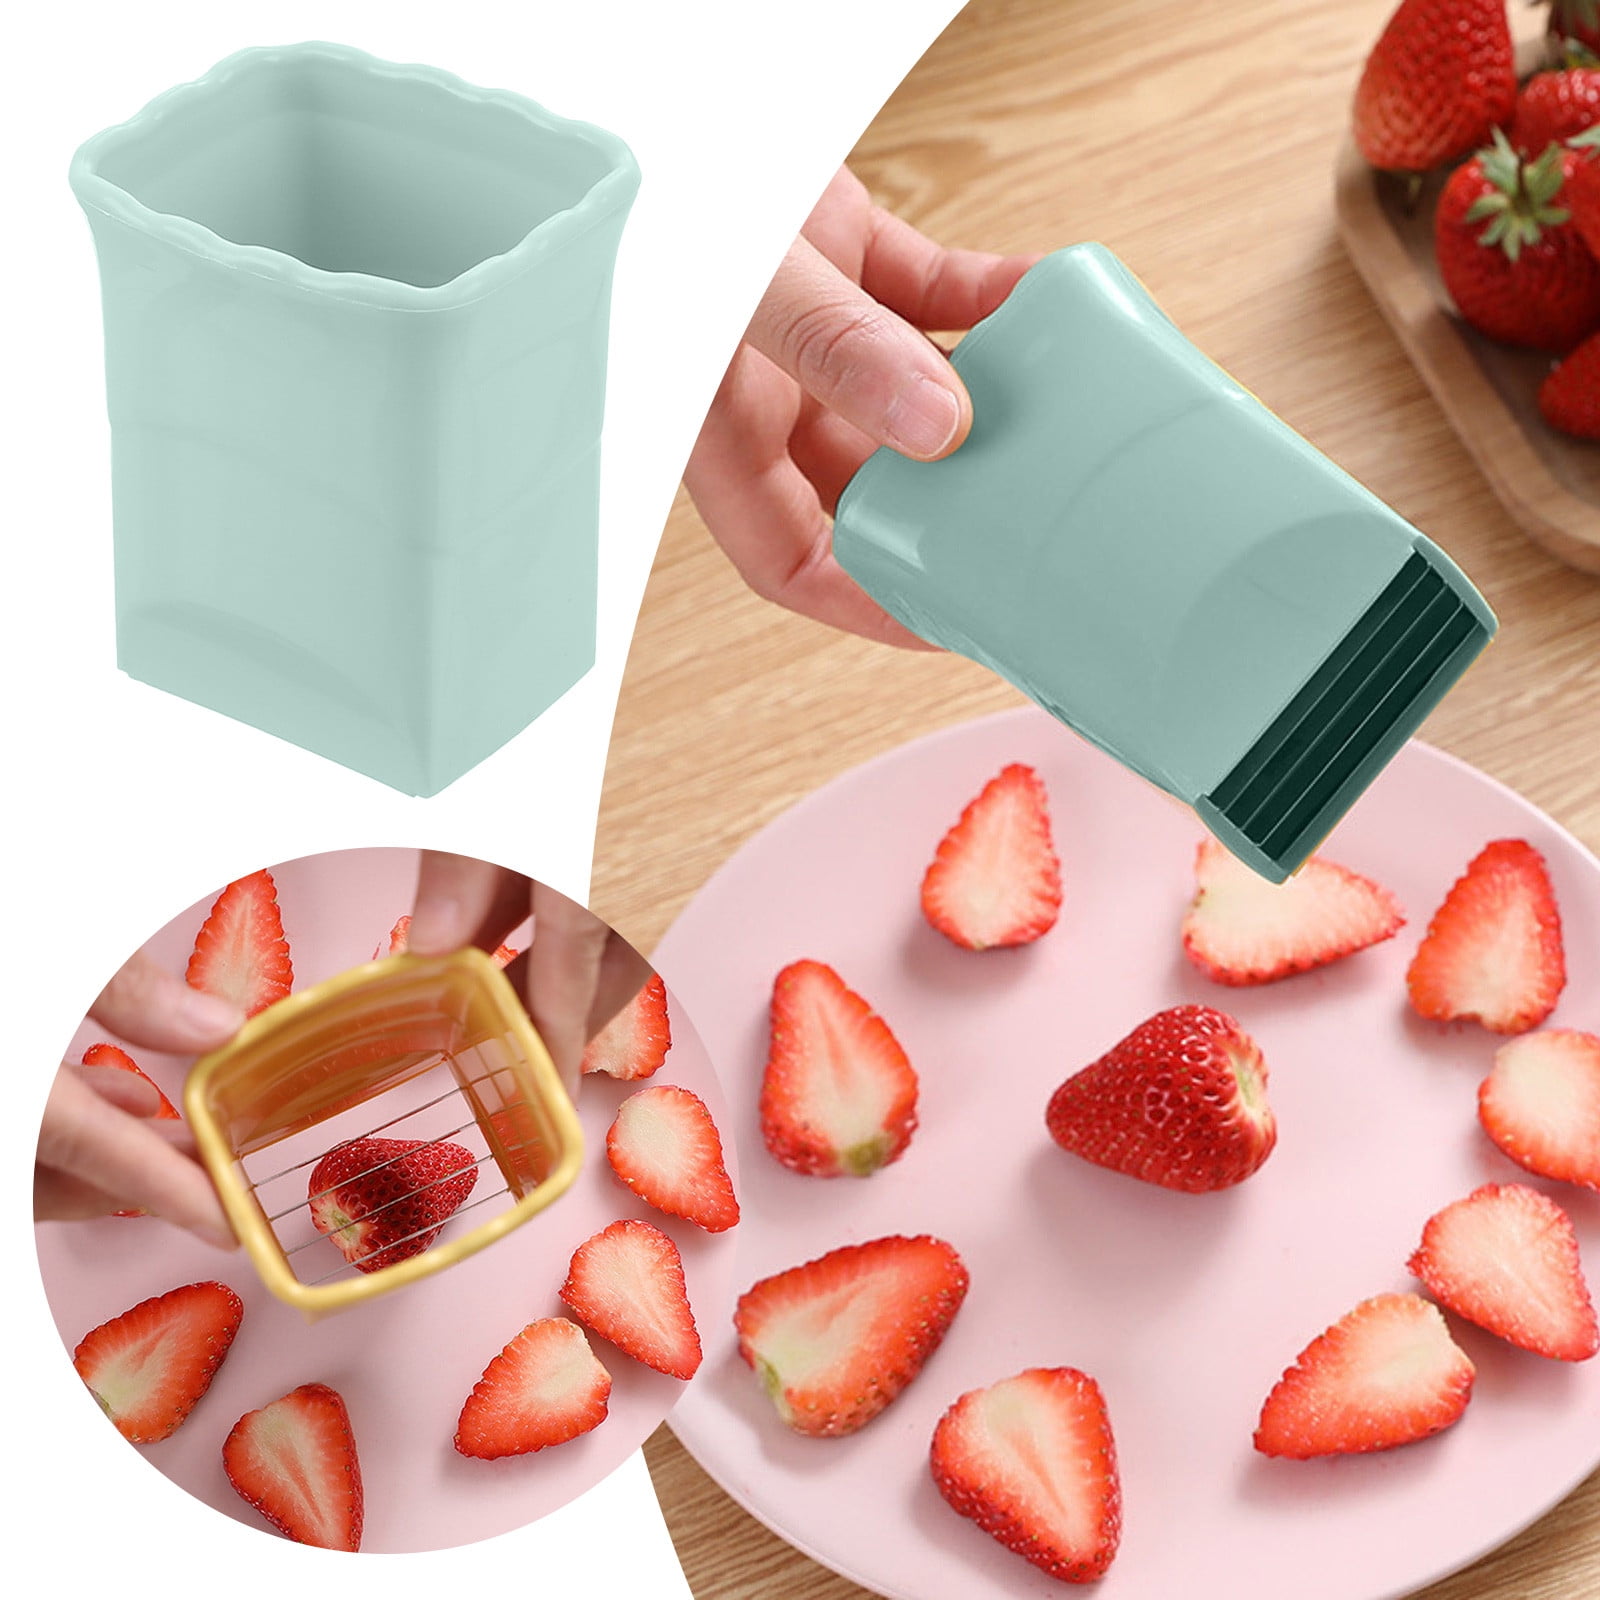 Slices Dices Chop Cup Chop2cup Strawberry Slicer Cup - Fruit & Vegetable  Slicer/dicer - Buy Cut N Cup,Chop2cup,Slicer Cup Product on